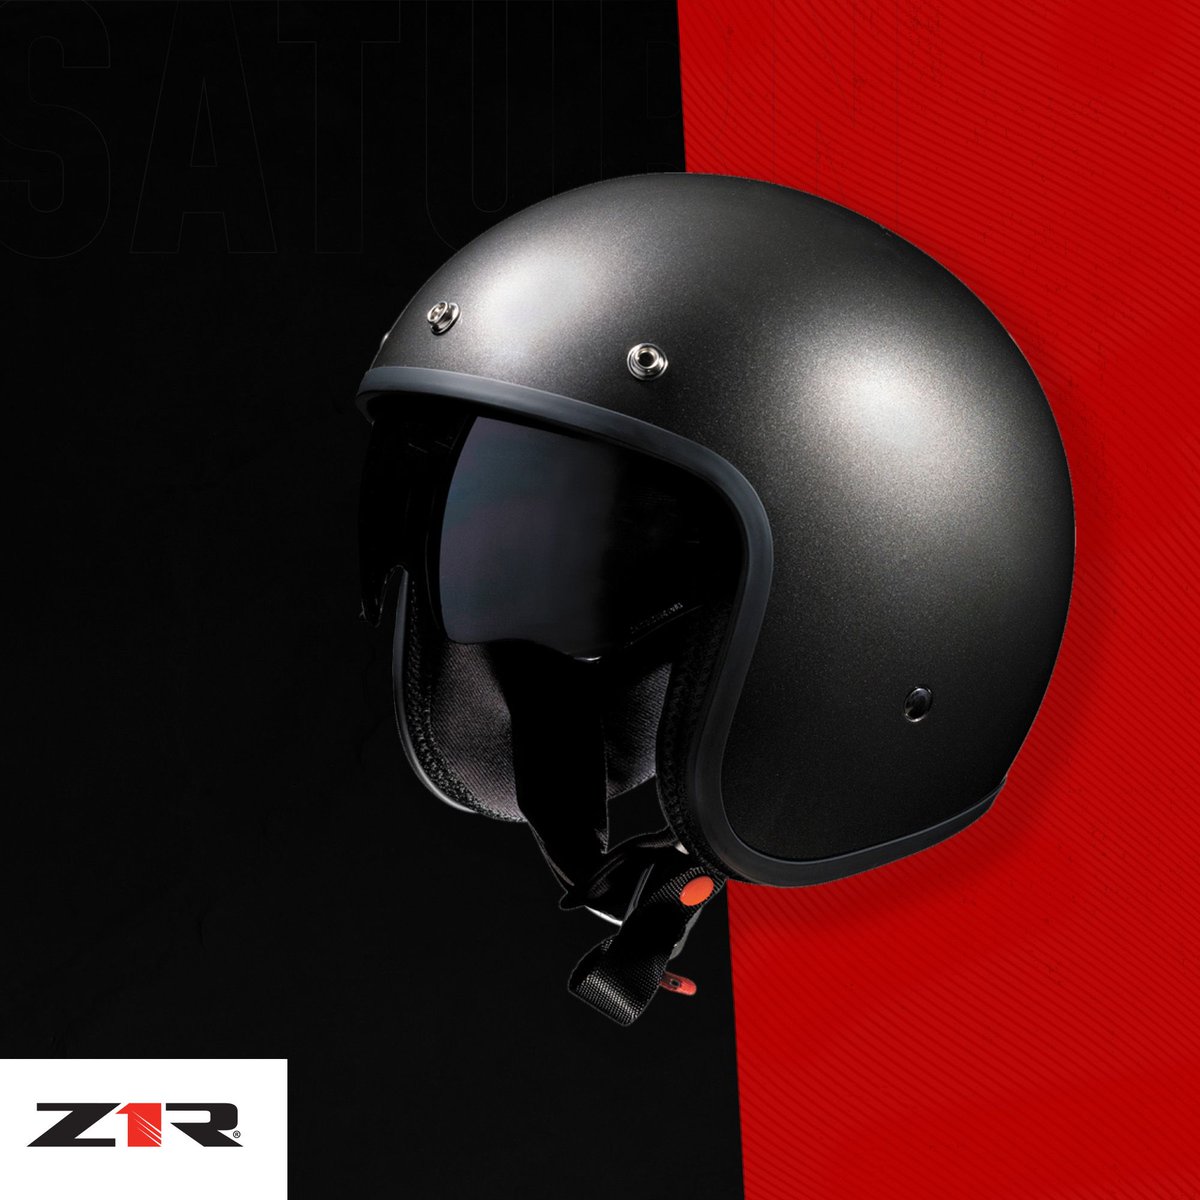 The Saturn open face helmet from @OfficialZ1R Available through your local Parts Canada dealer. 
-
#RideZ1R #vtwinlife #motorcycleperformance #ridemore  #powersports #motorcyclehelmets #dragspecialties #wesupportthesport